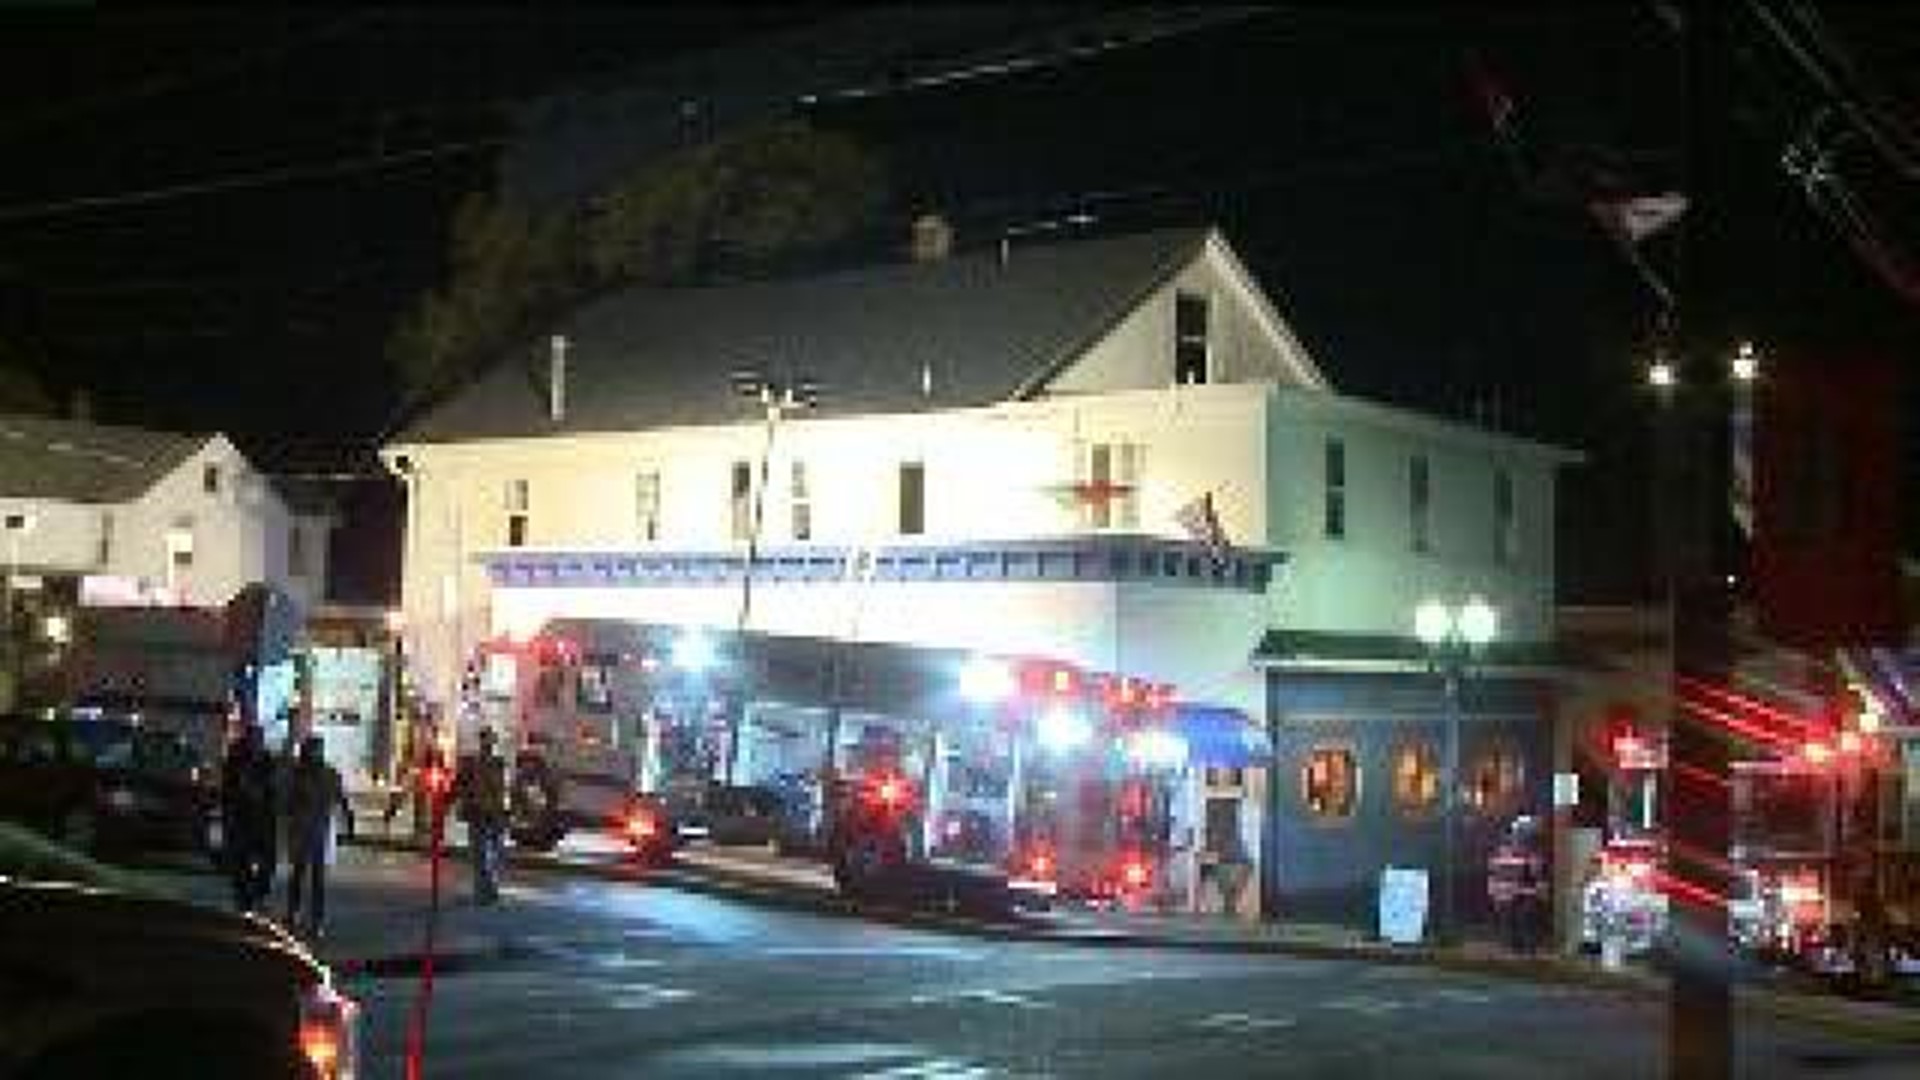 Fire Forces Folks from Restaurant